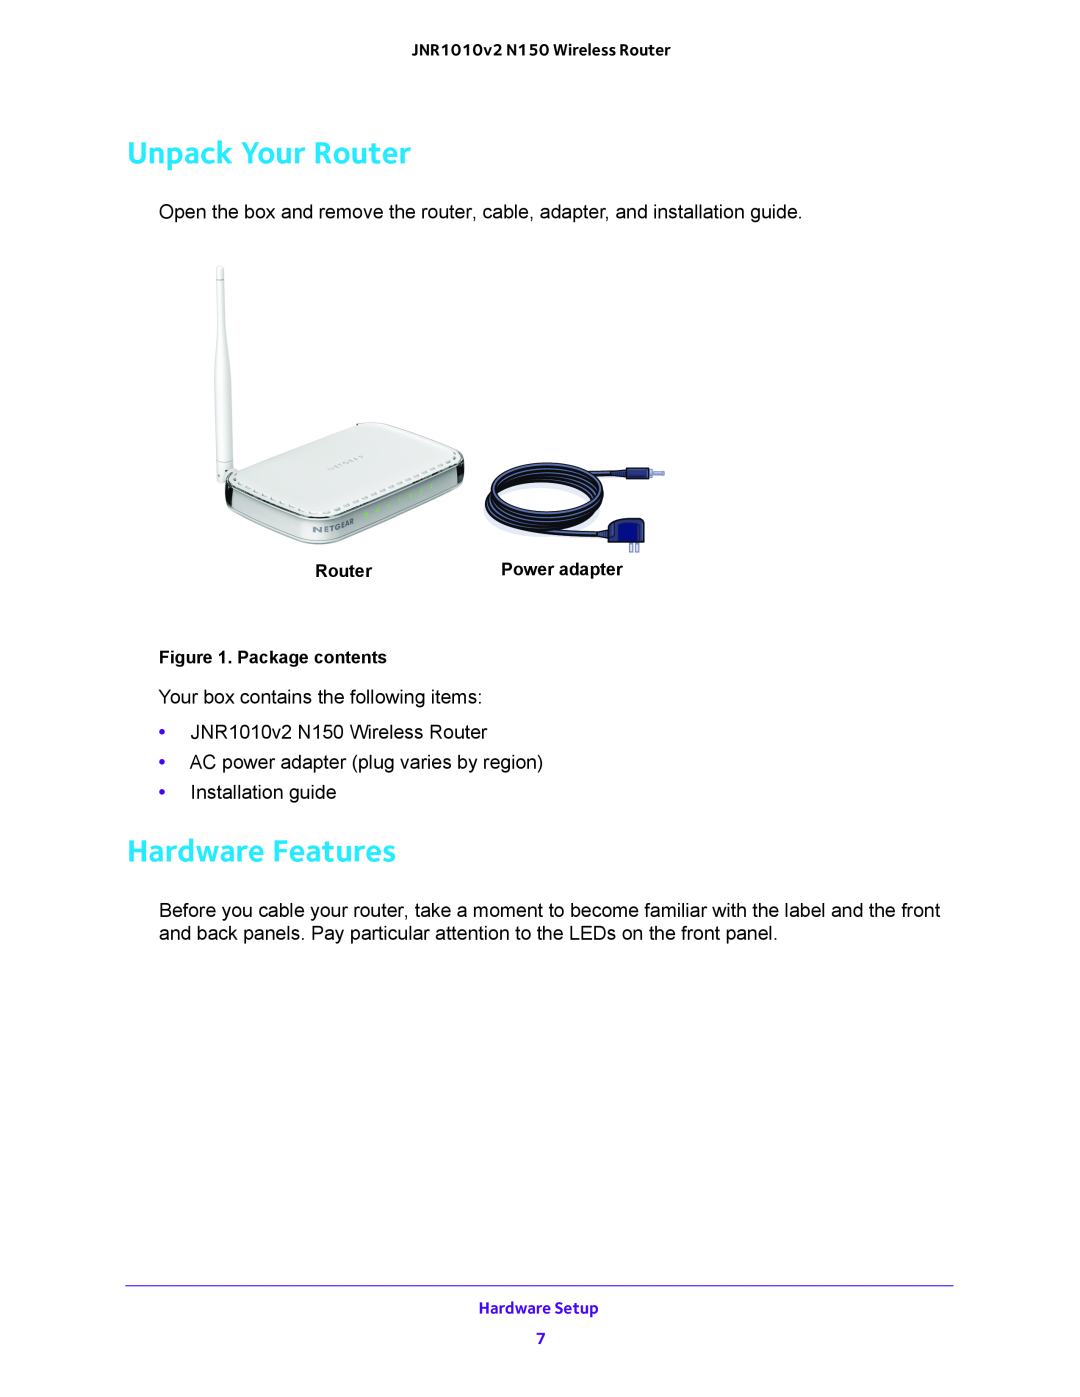 NETGEAR JNR1010V2 user manual Unpack Your Router, Hardware Features 